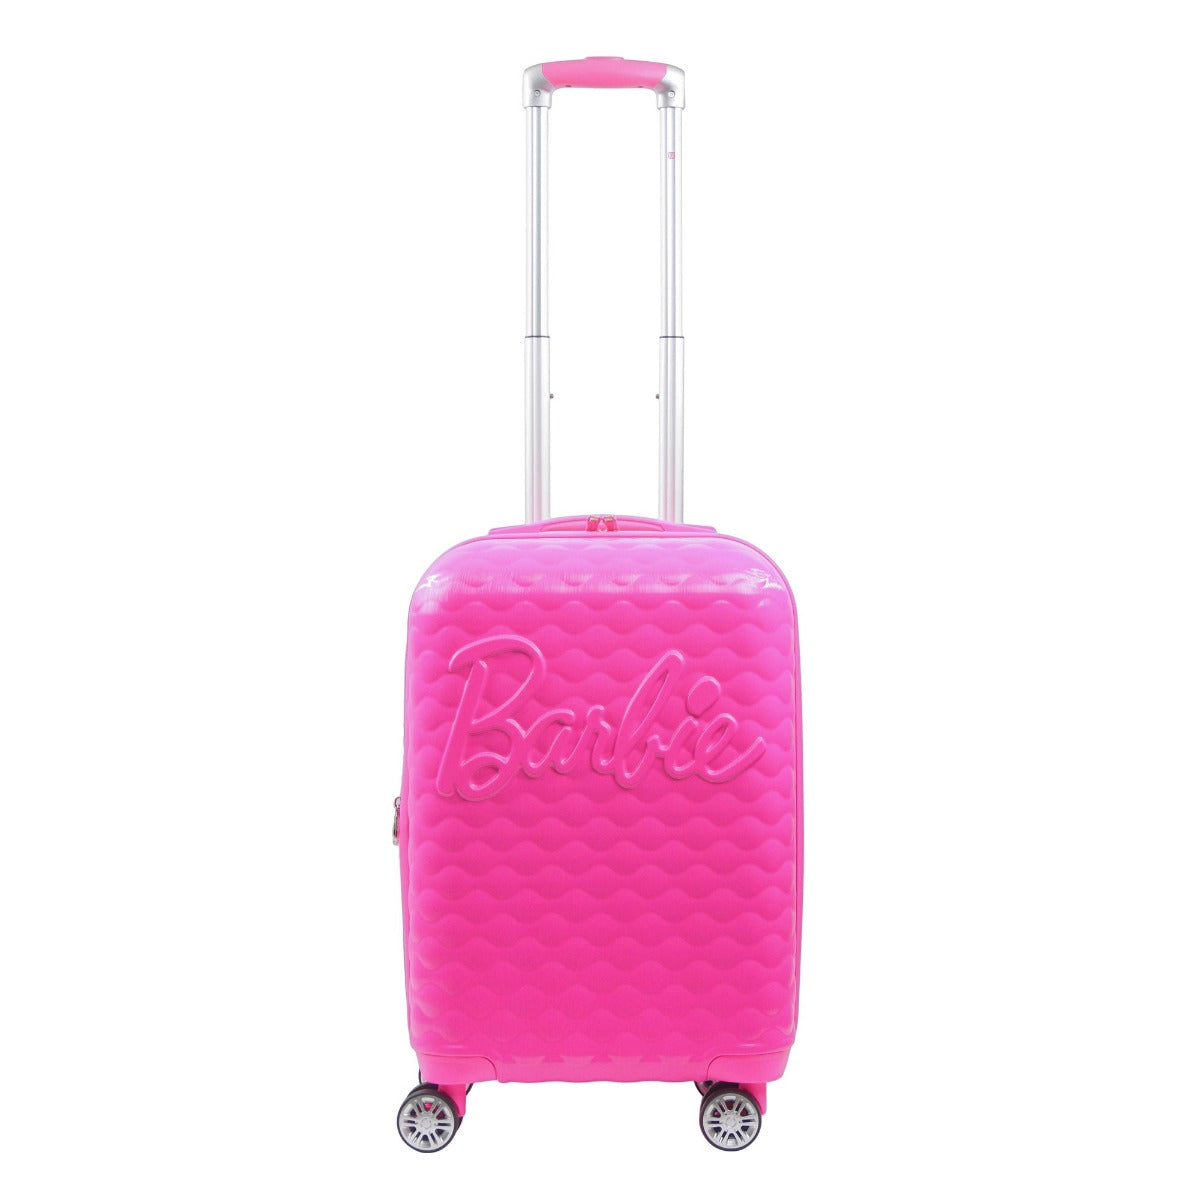 Hot pink Barbie quilted texture 22.5" hardshell carry-on spinner suitcase